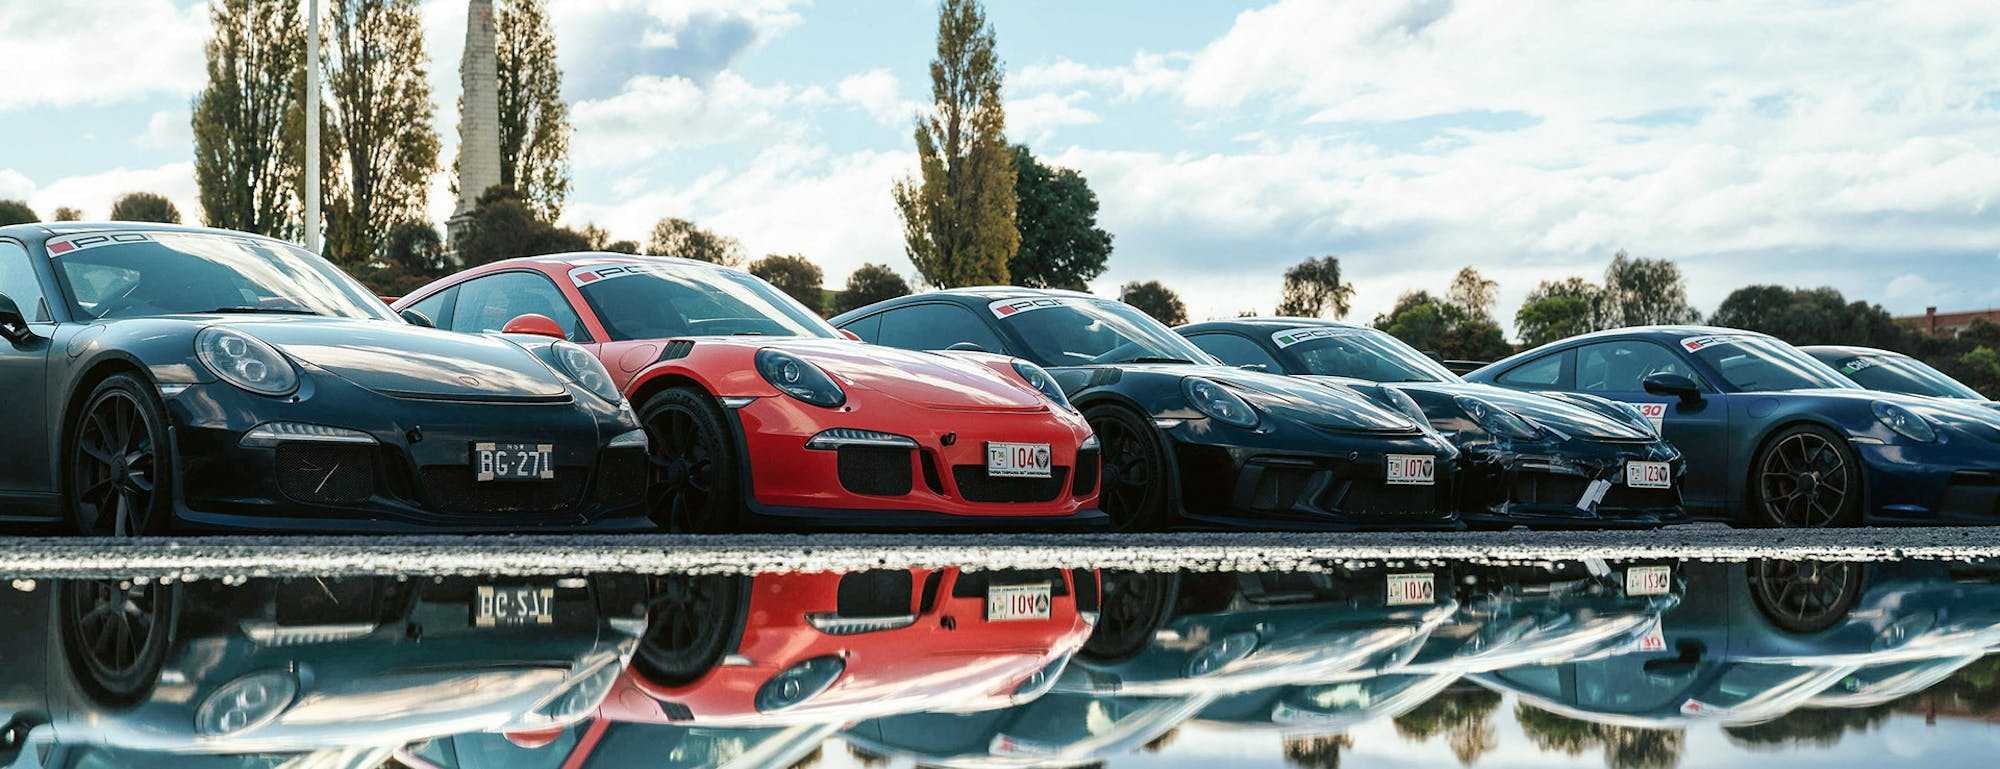 Five Porsche cars in a line reflected in water